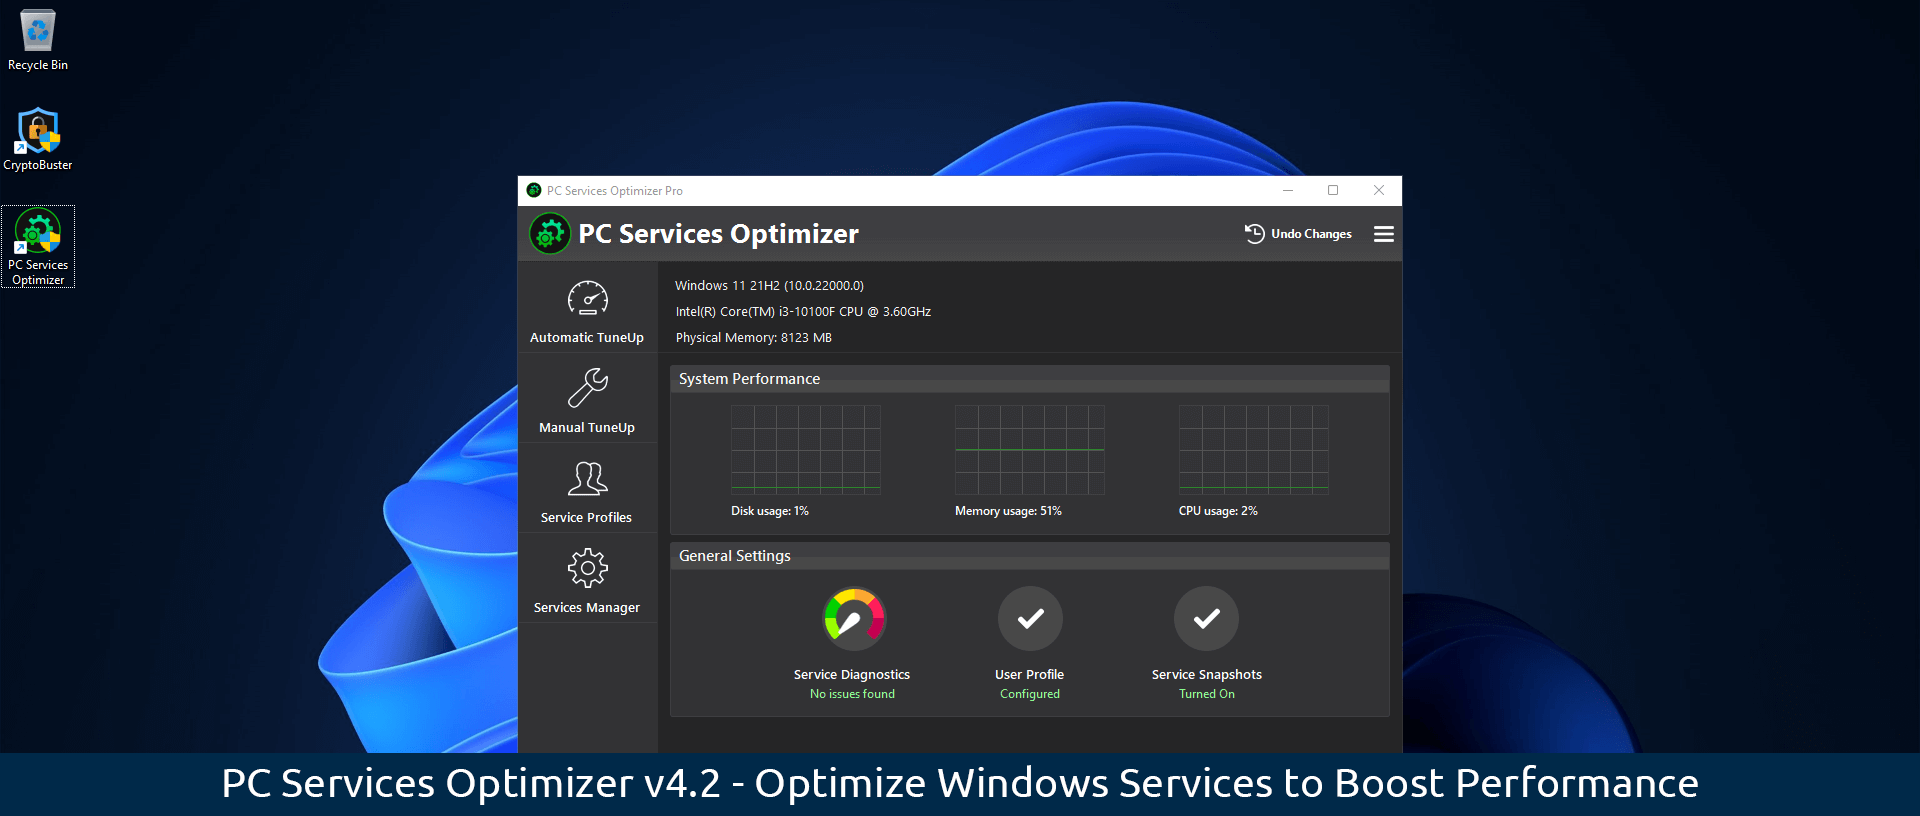 PC Services Optimizer - Optimize Windows Services to Boost Performance